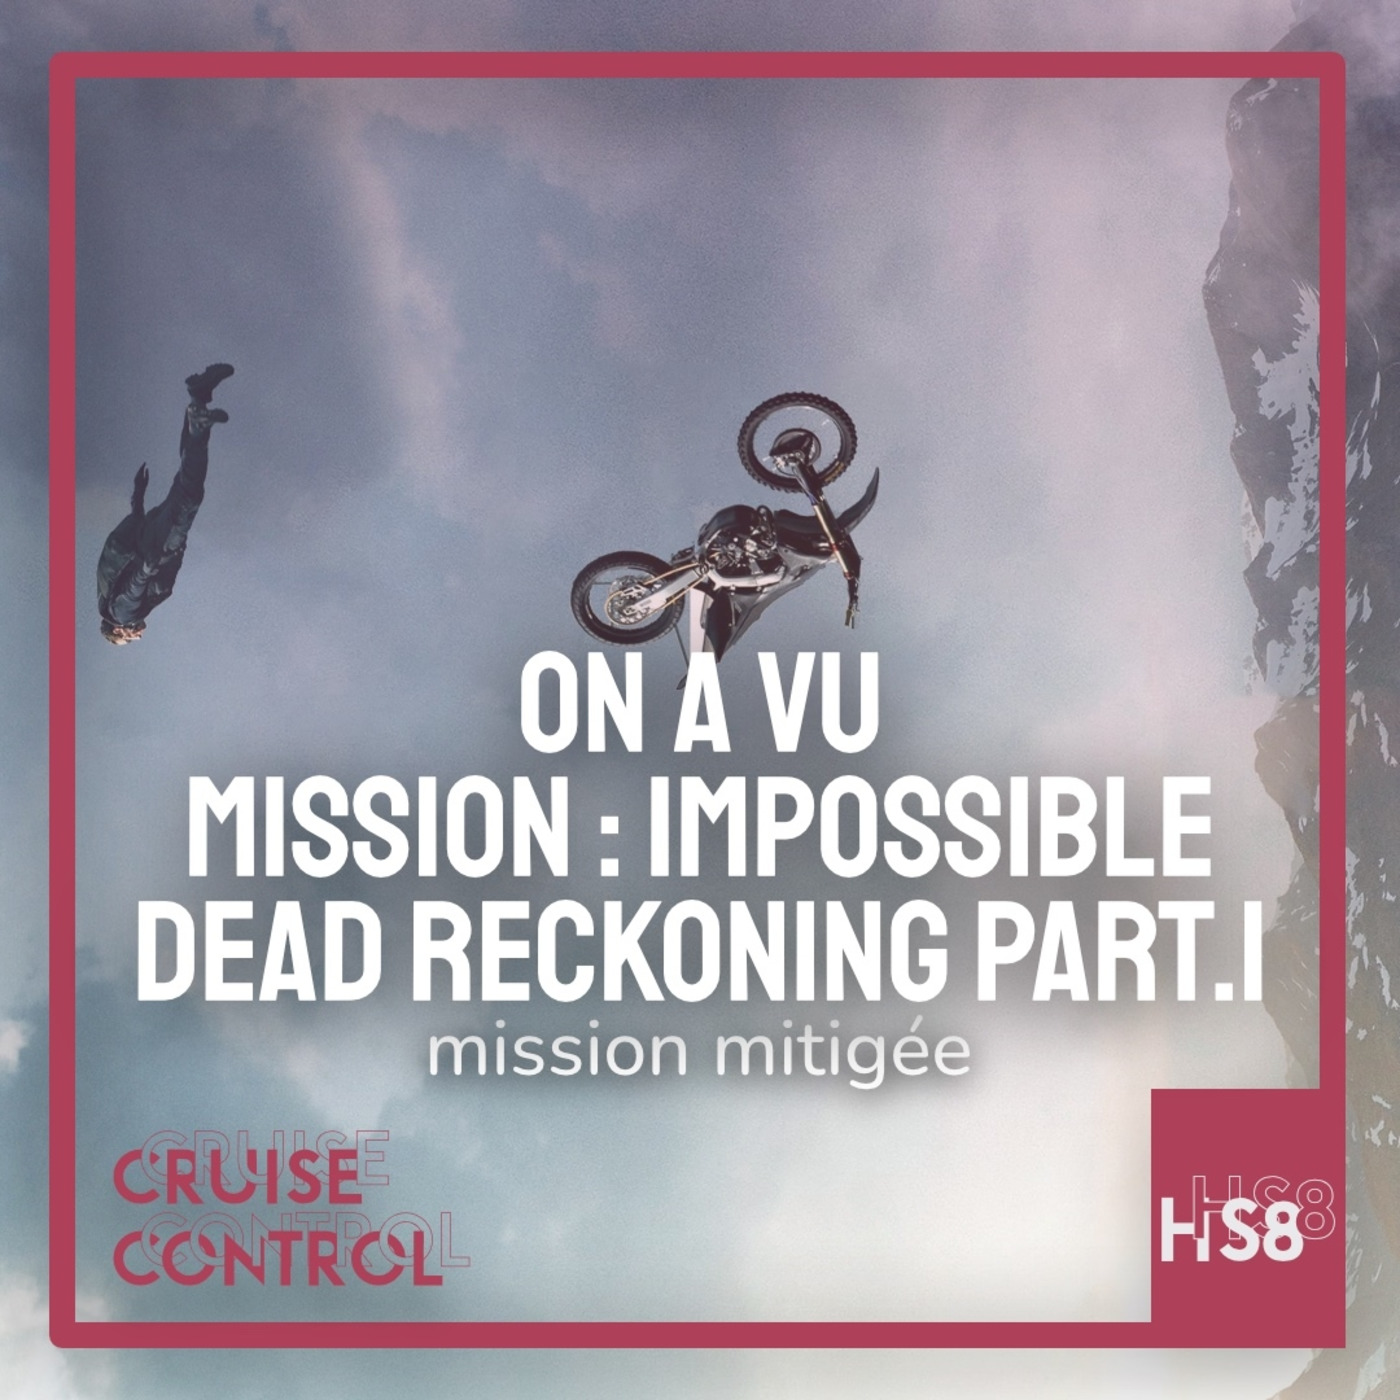 On a vu Mission : Impossible – Dead Reckoning Part.1